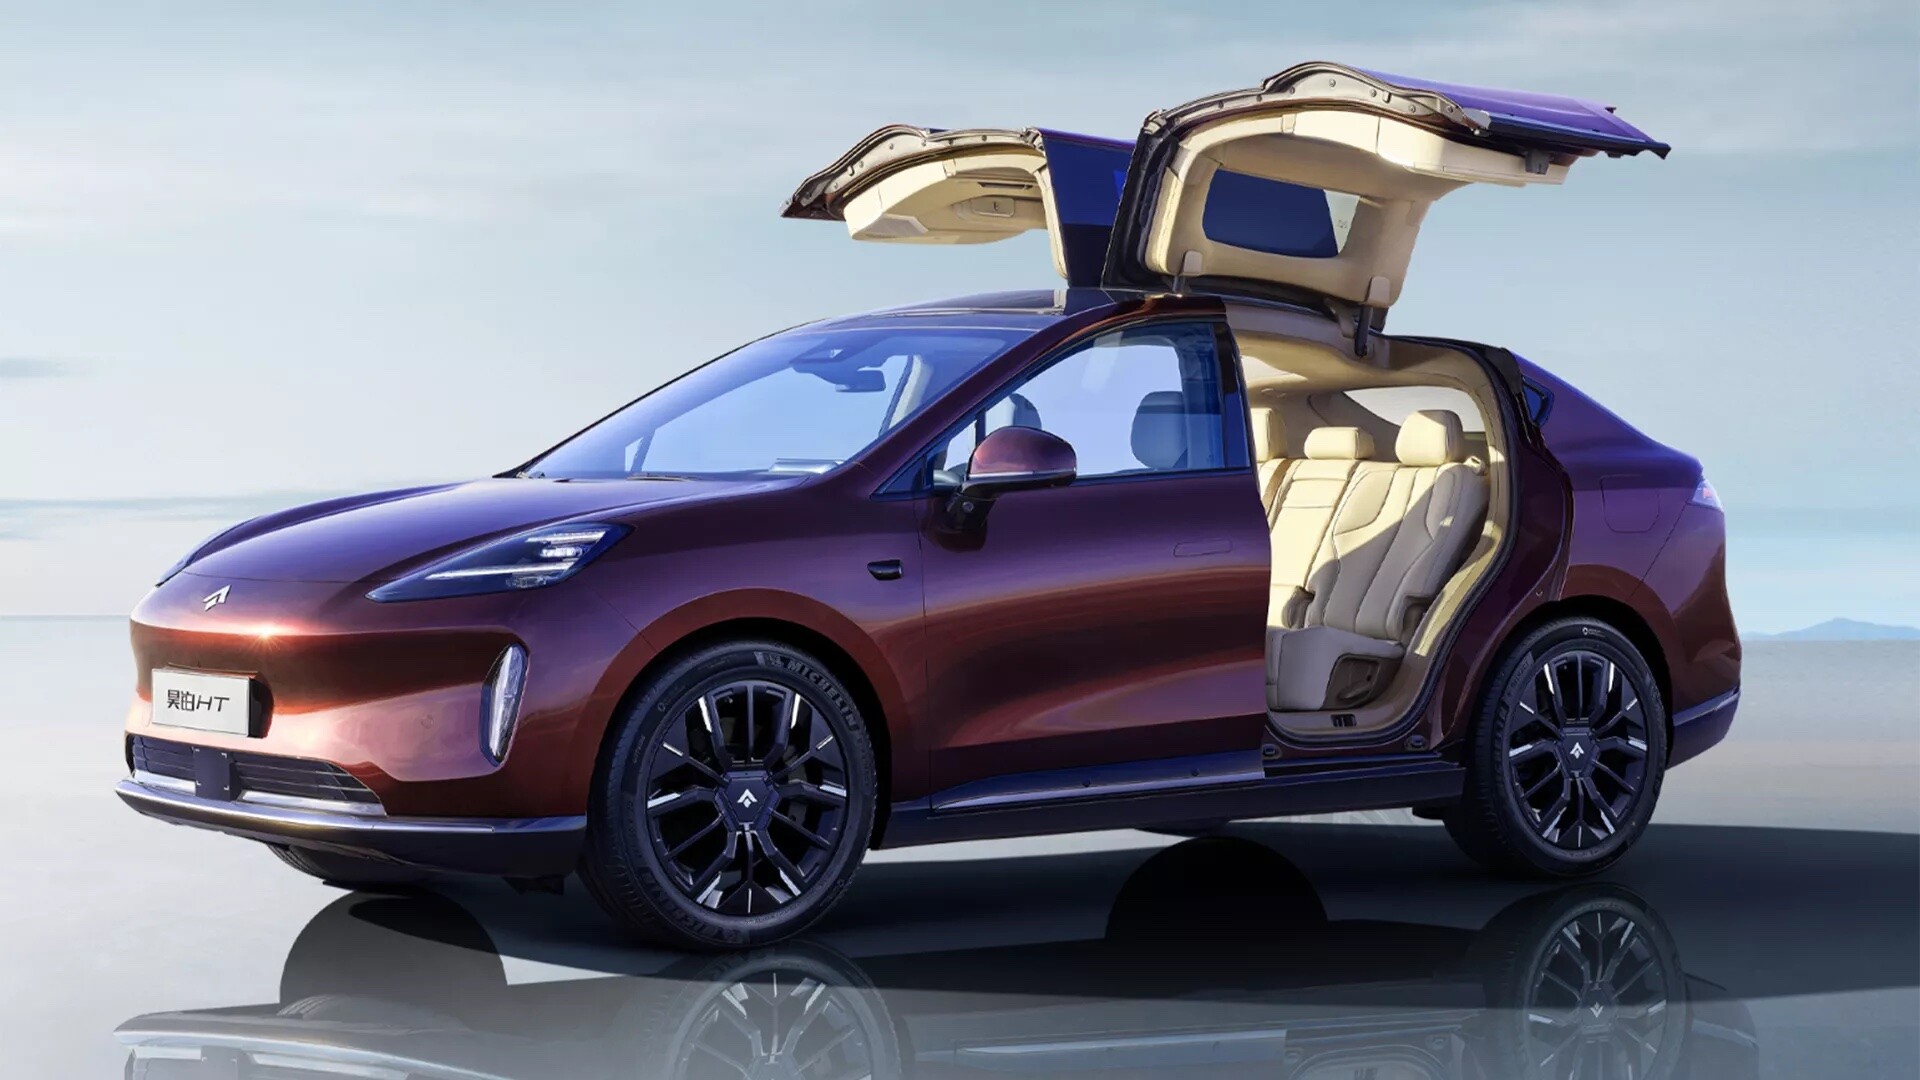 the-all-new-gac-aion-hyper-ht-suv-looks-like-the-tesla-model-x-but-it-is-cheaper-223240-1.jpg